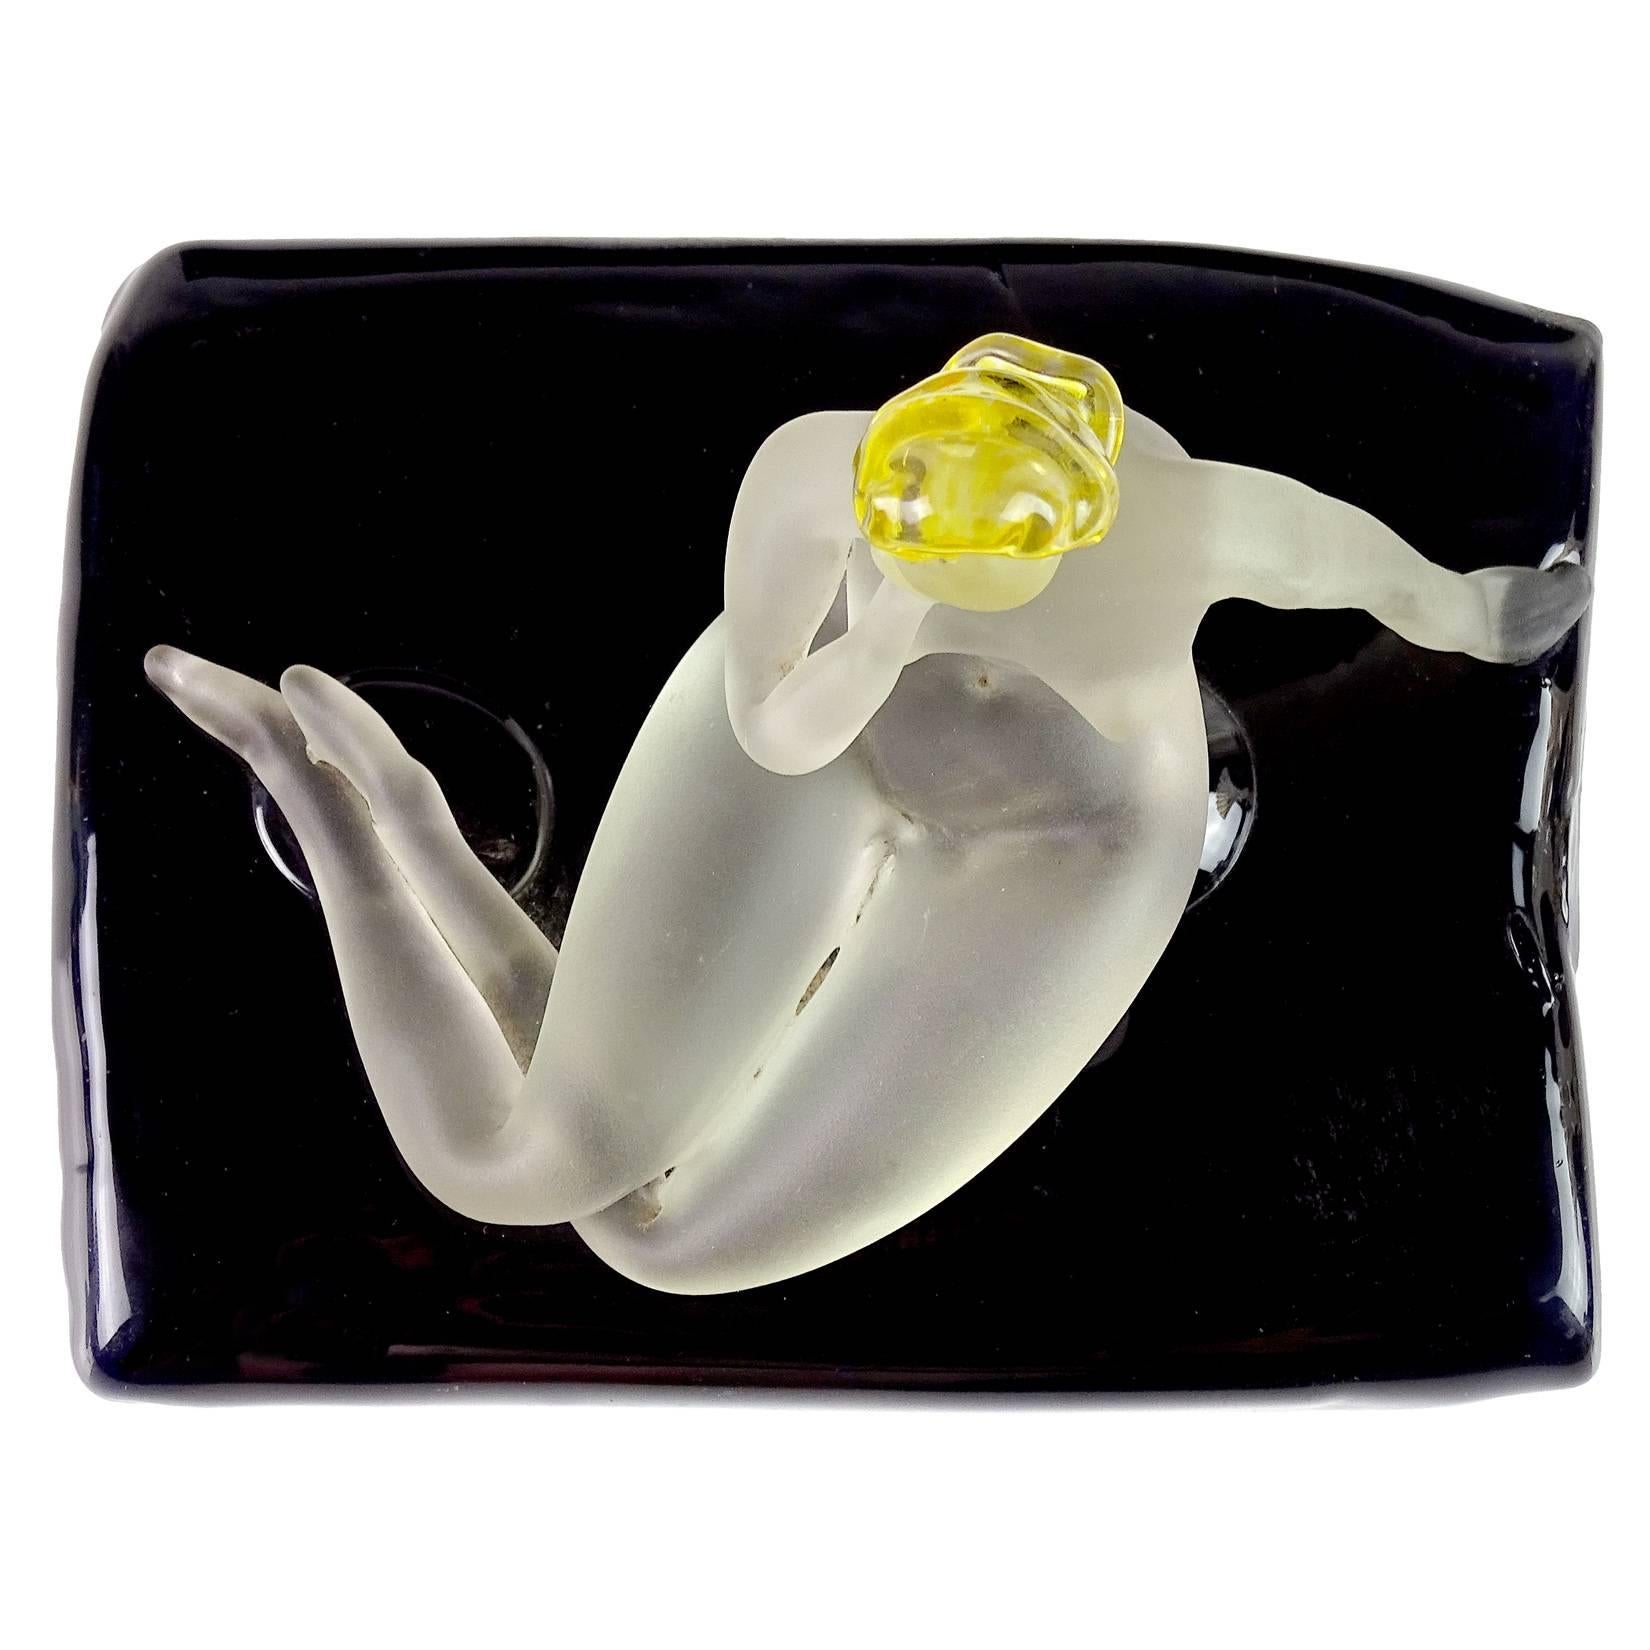 Very rare Murano handblown satin Italian art glass nude woman figure on base. Attributed to the Barovier Seguso Ferro company, circa 1930s. Incredibly detailed figure study. Has soft white skin with bright blond hair. Similar piece is illustrated on